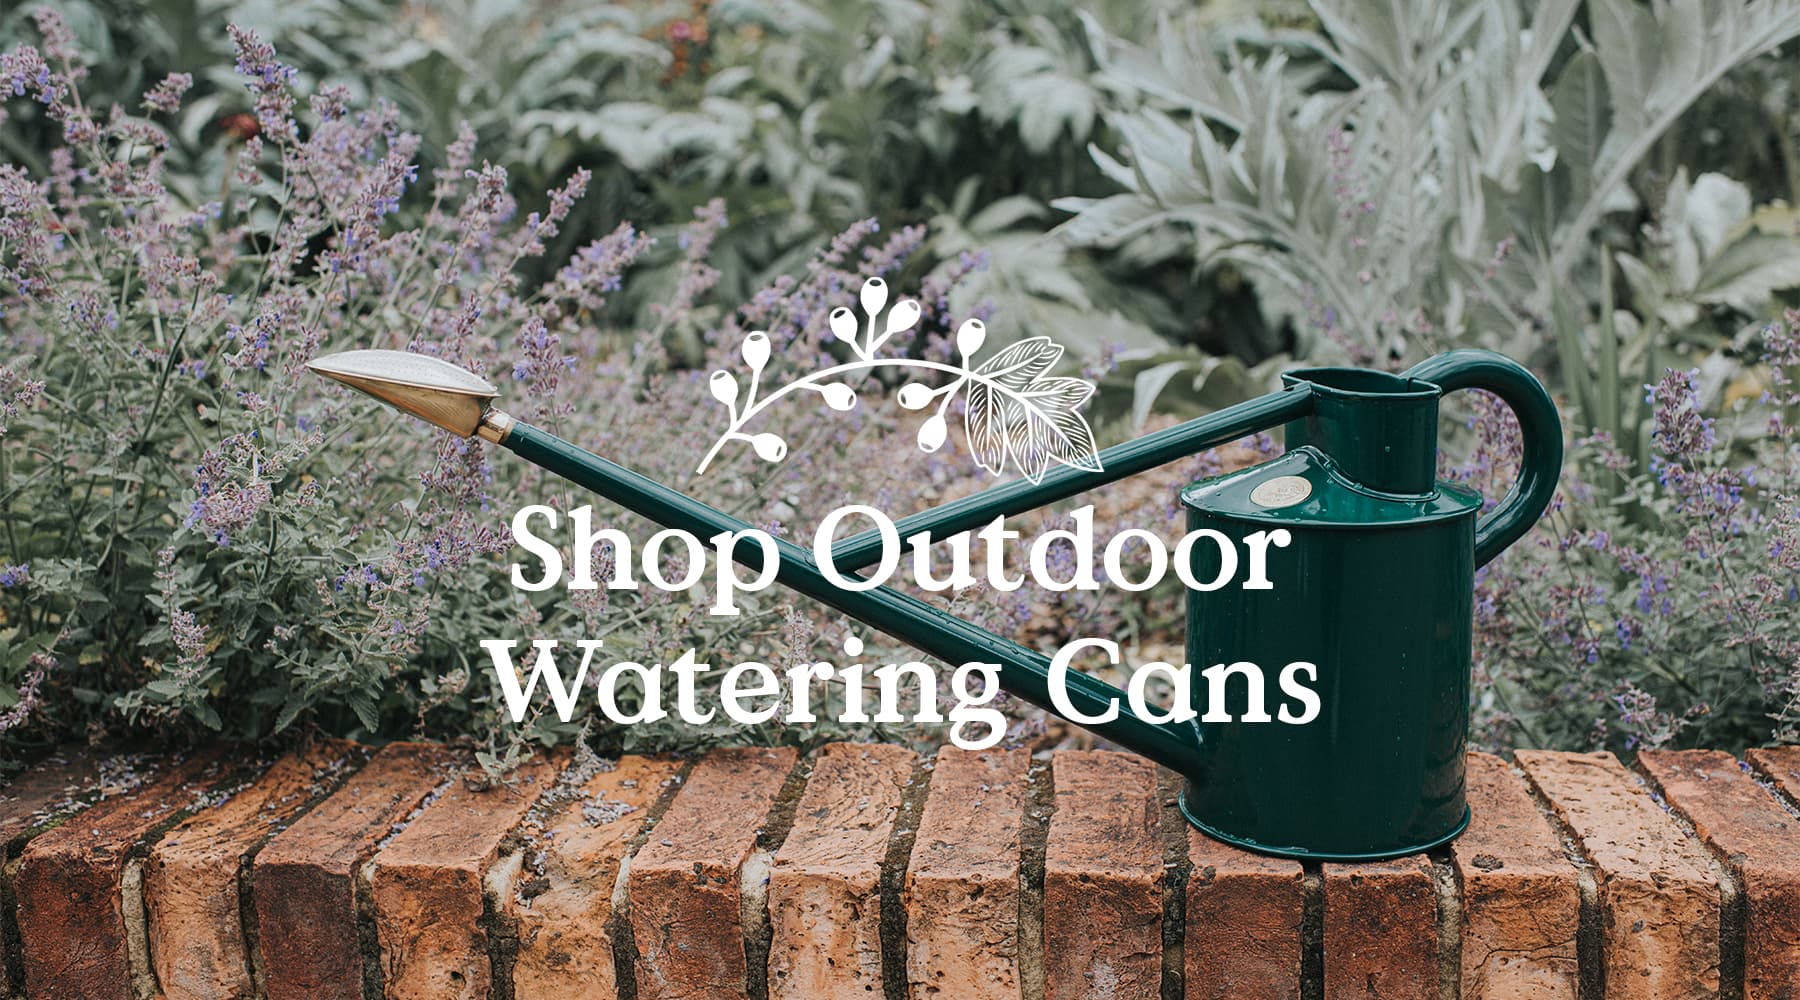 Outdoor watering cans